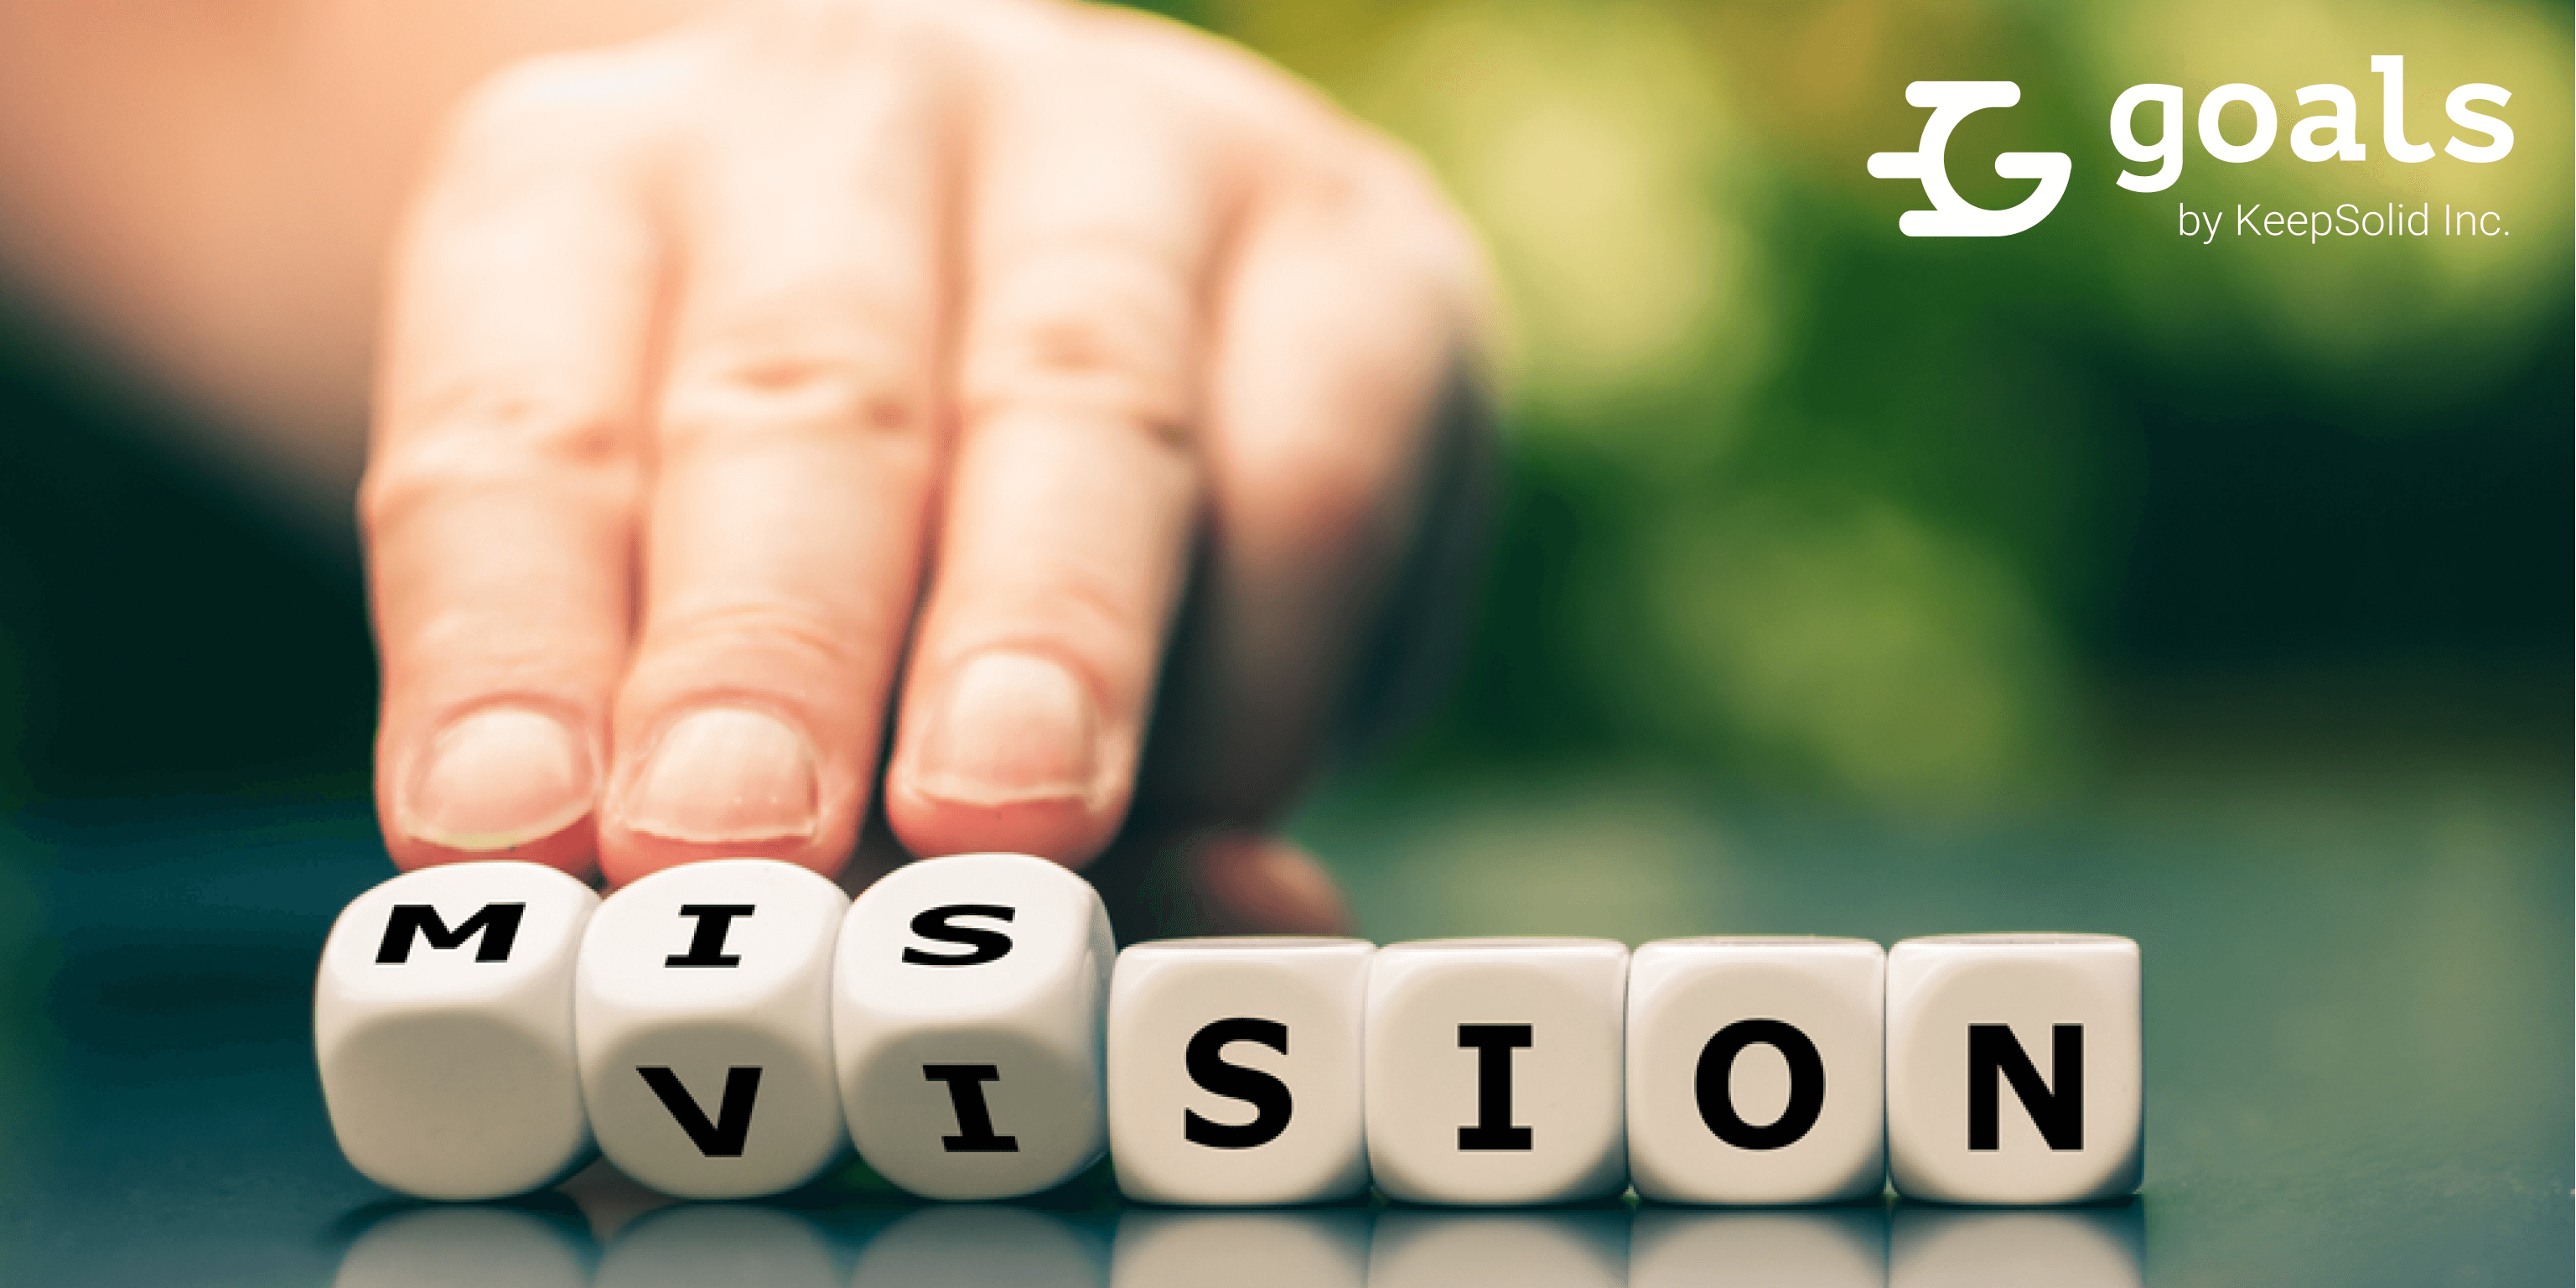 From a vision to a mission. Hand turns dice and changes the word vision to mission